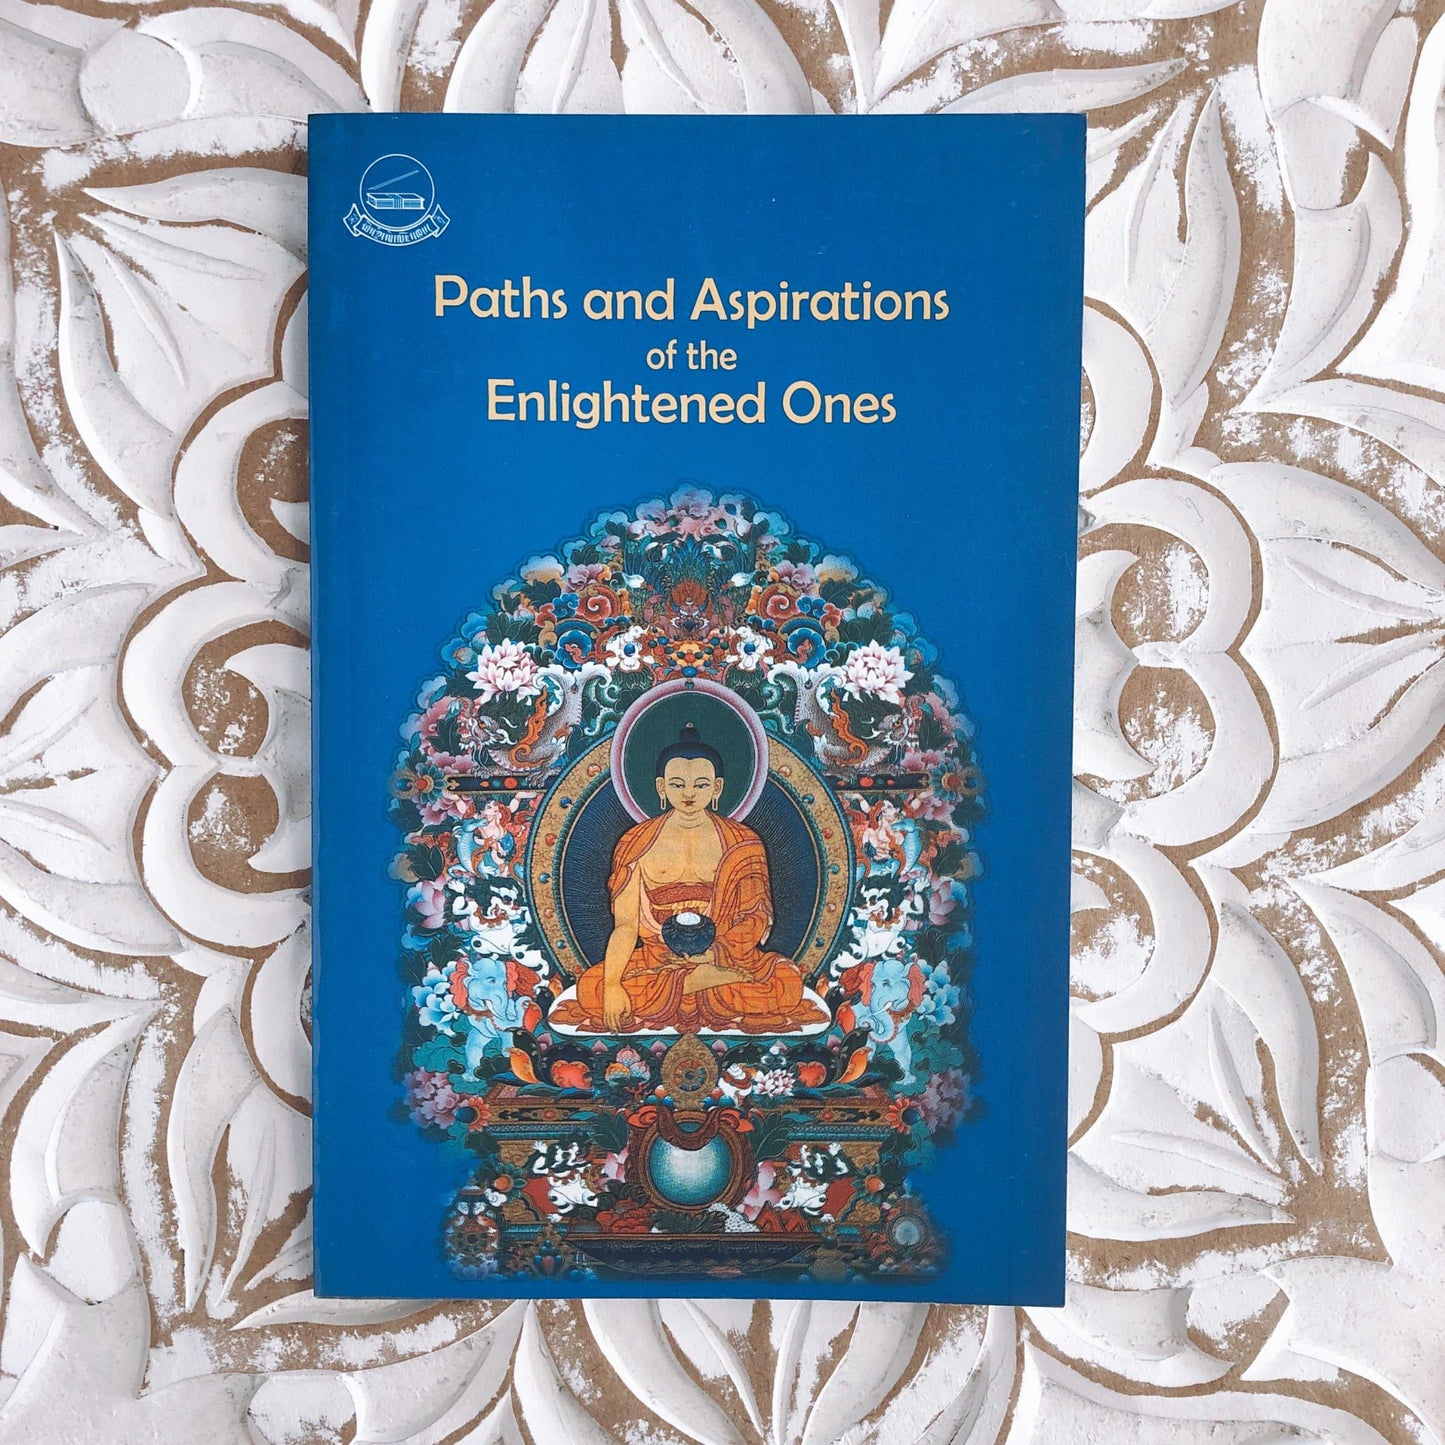 Paths and Aspirations of the Enlightened Ones